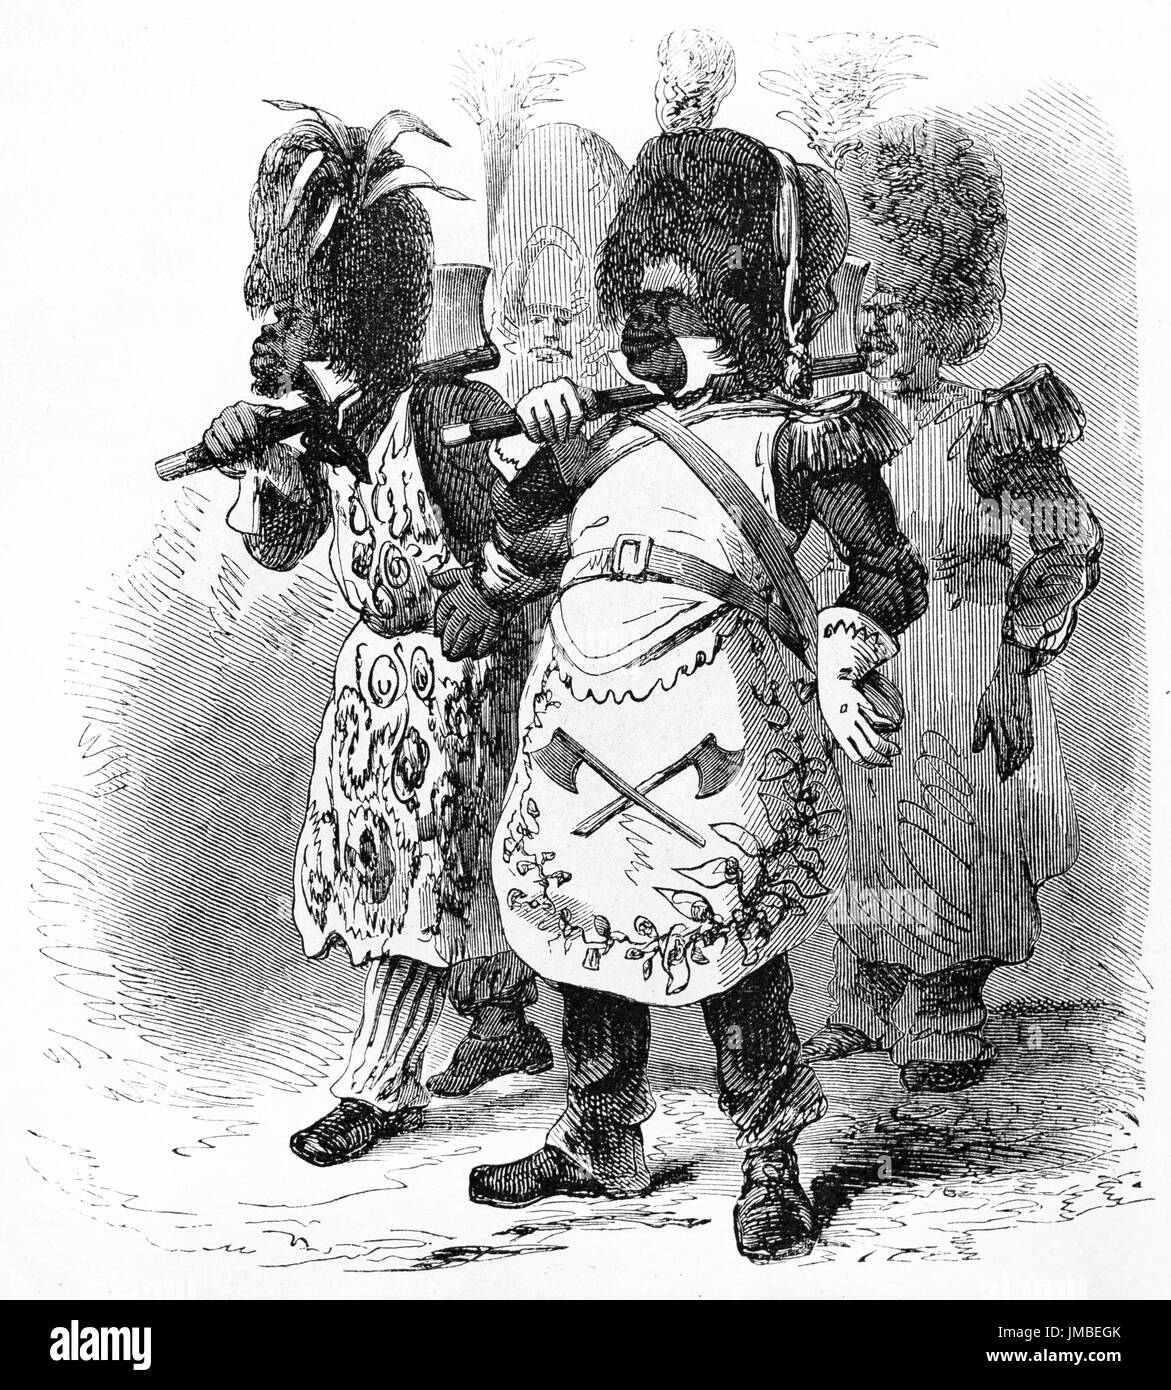 grotesque black men freaky dressed with strange big hats. Rio de Janeiro National guard sappers. Ancient grey tone etching style art by Riou, 1861 Stock Photo